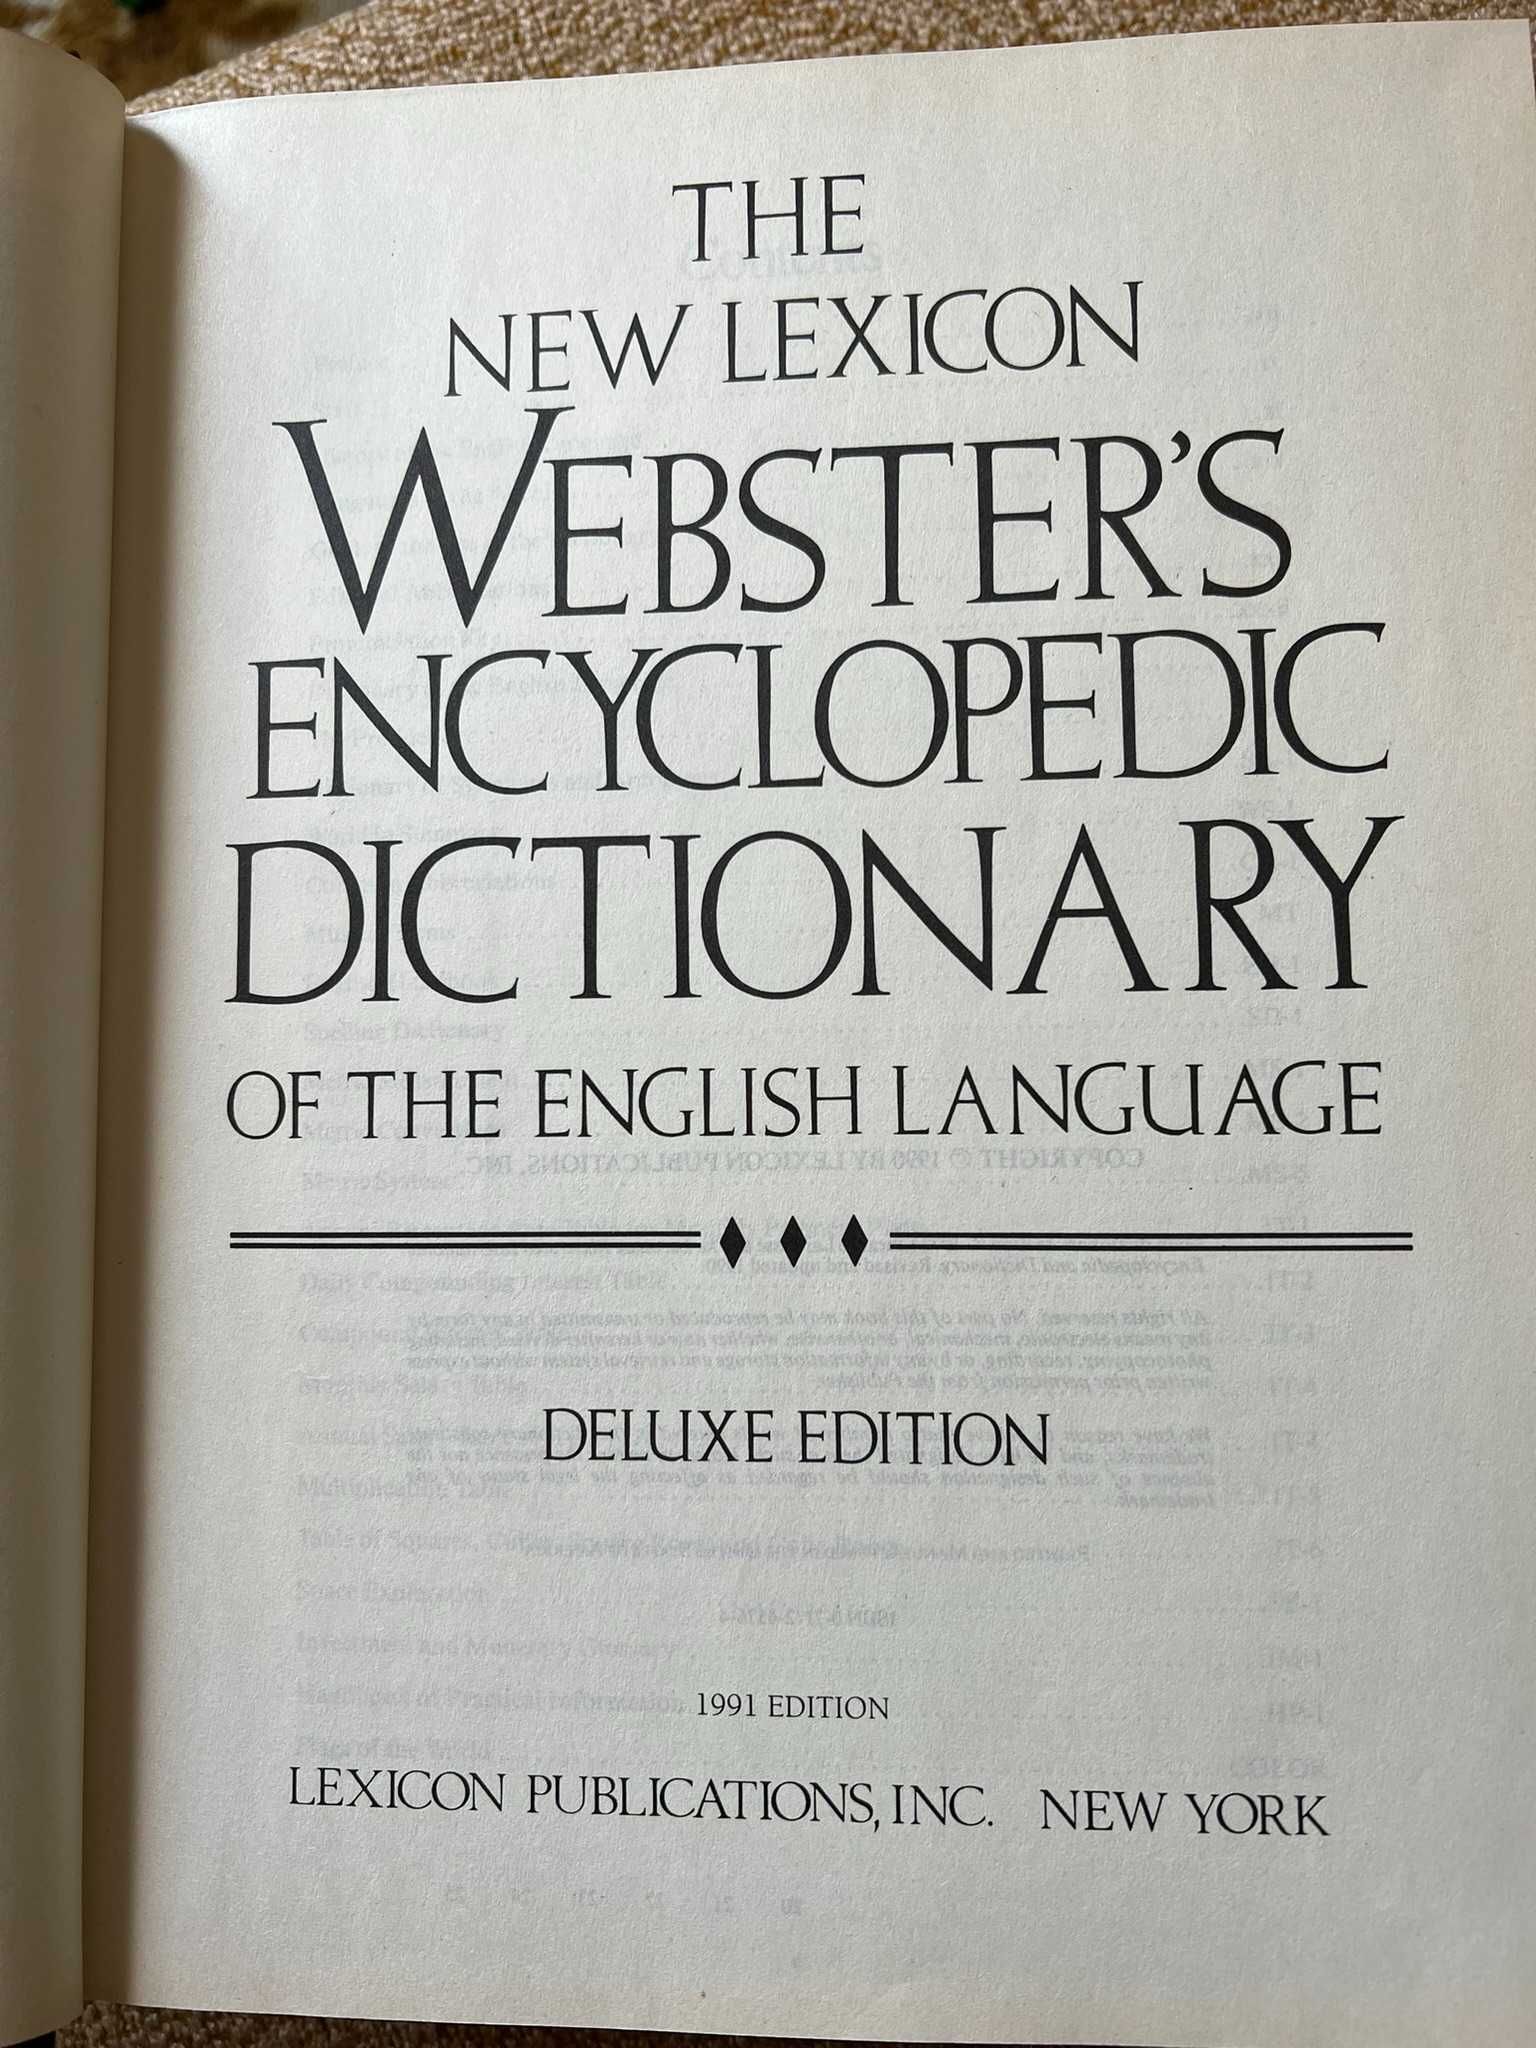 Webster's encyclopedic dictionary